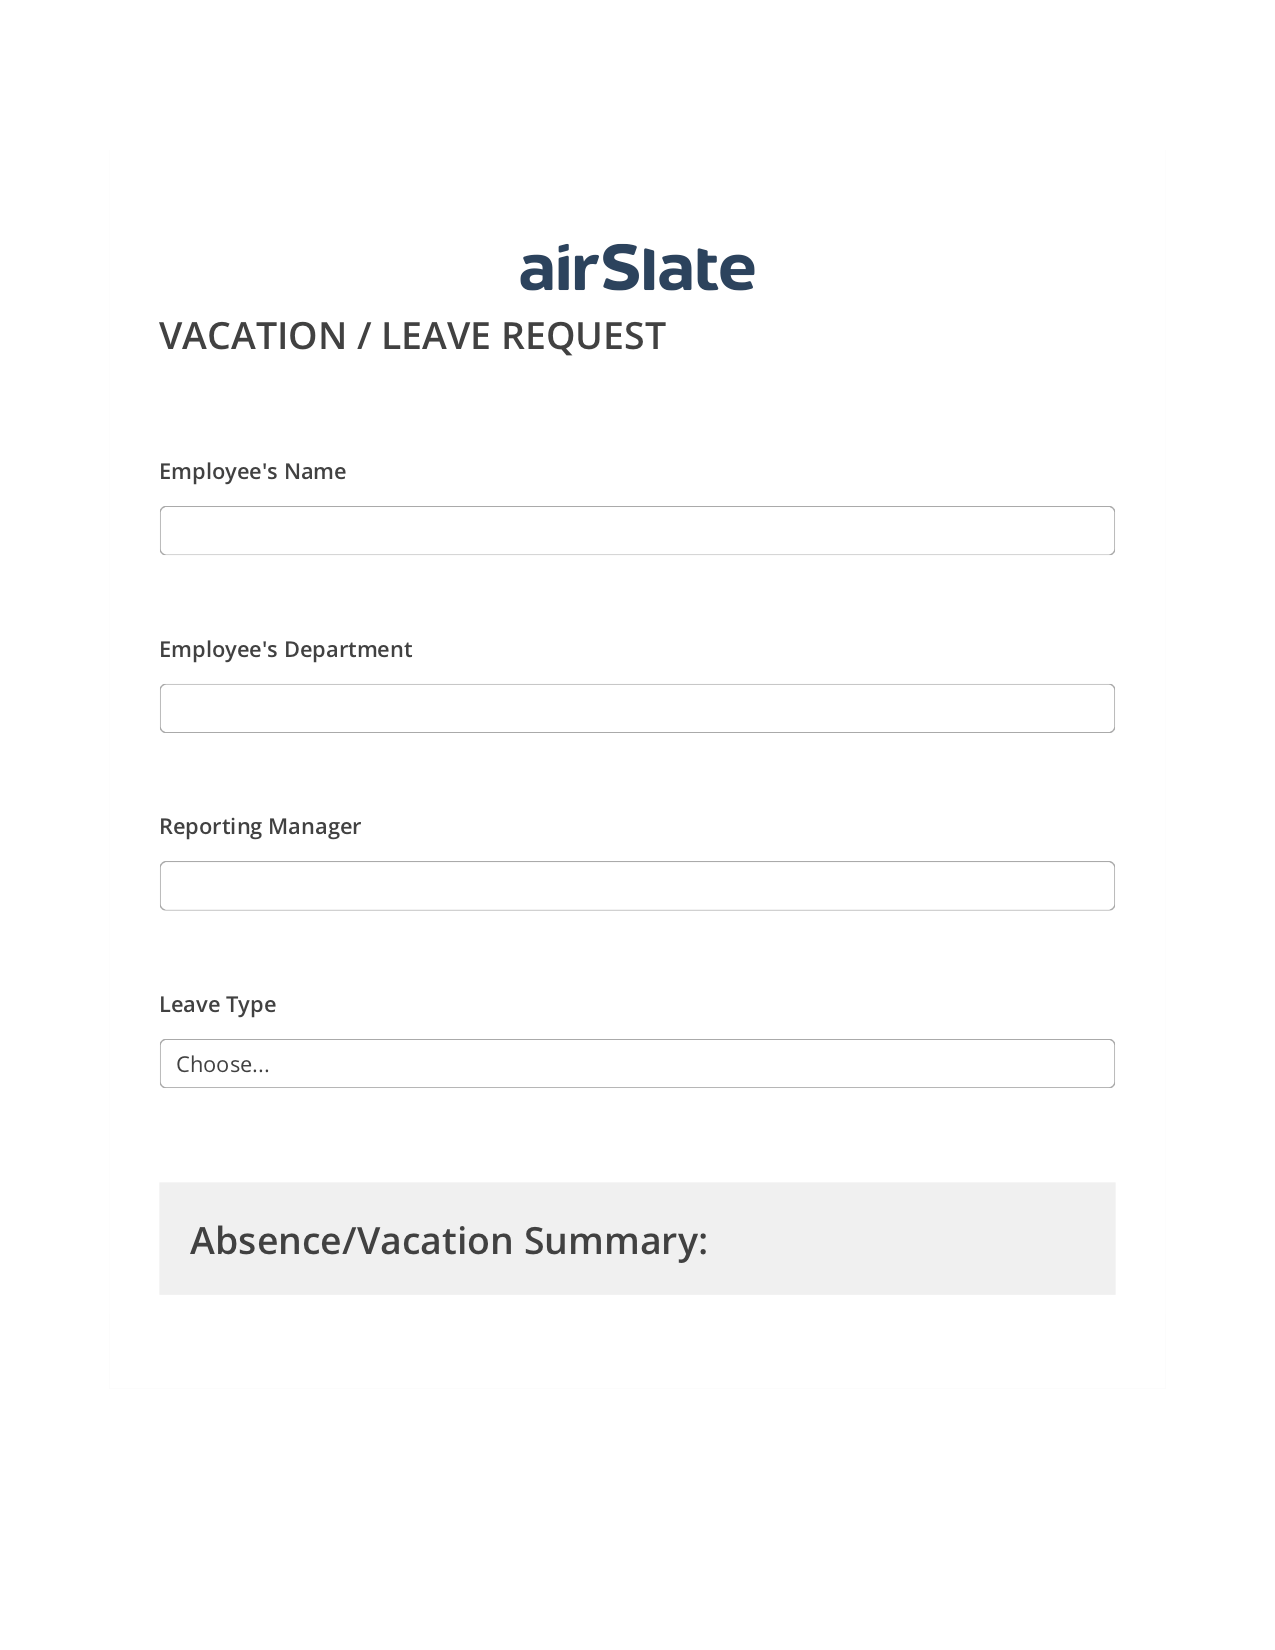 Vacation/Leave Request Workflow Pre-fill from CSV File Bot, Invoke Salesforce Process Bot, Archive to Google Drive Bot